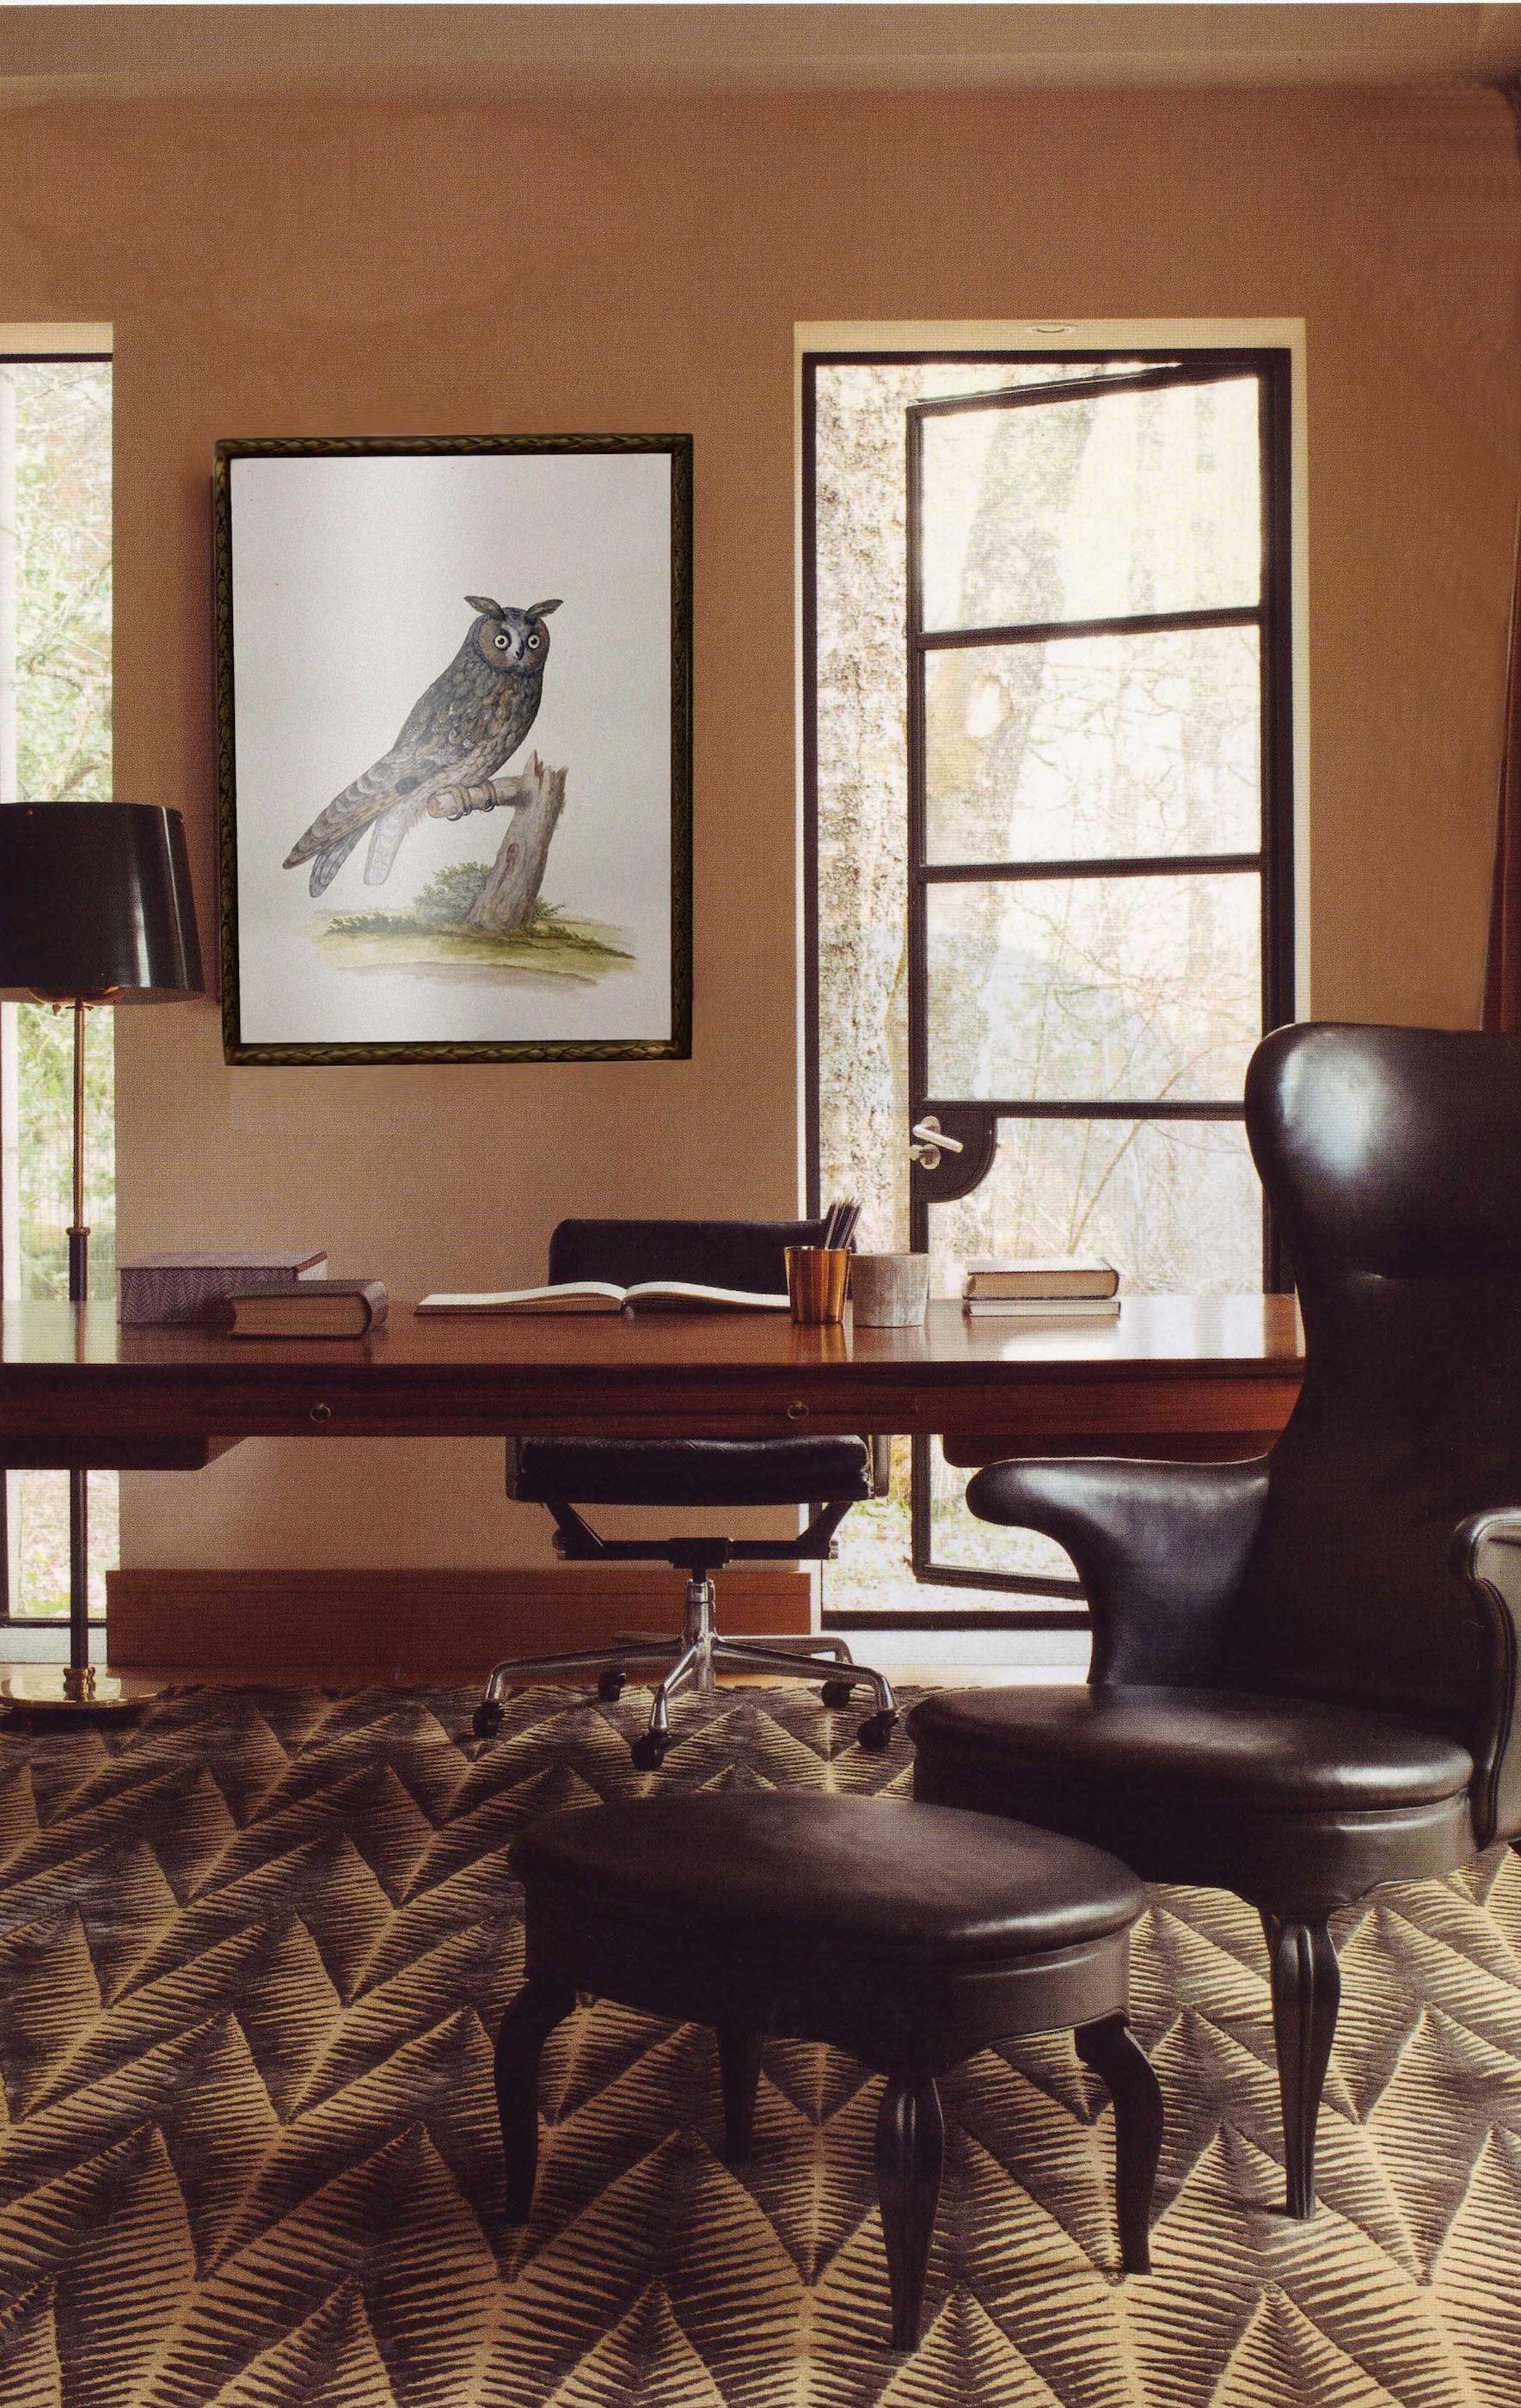 Wildlife painting of sitting owl by british Enlightenment painter  - Gray Animal Art by Peter Paillou